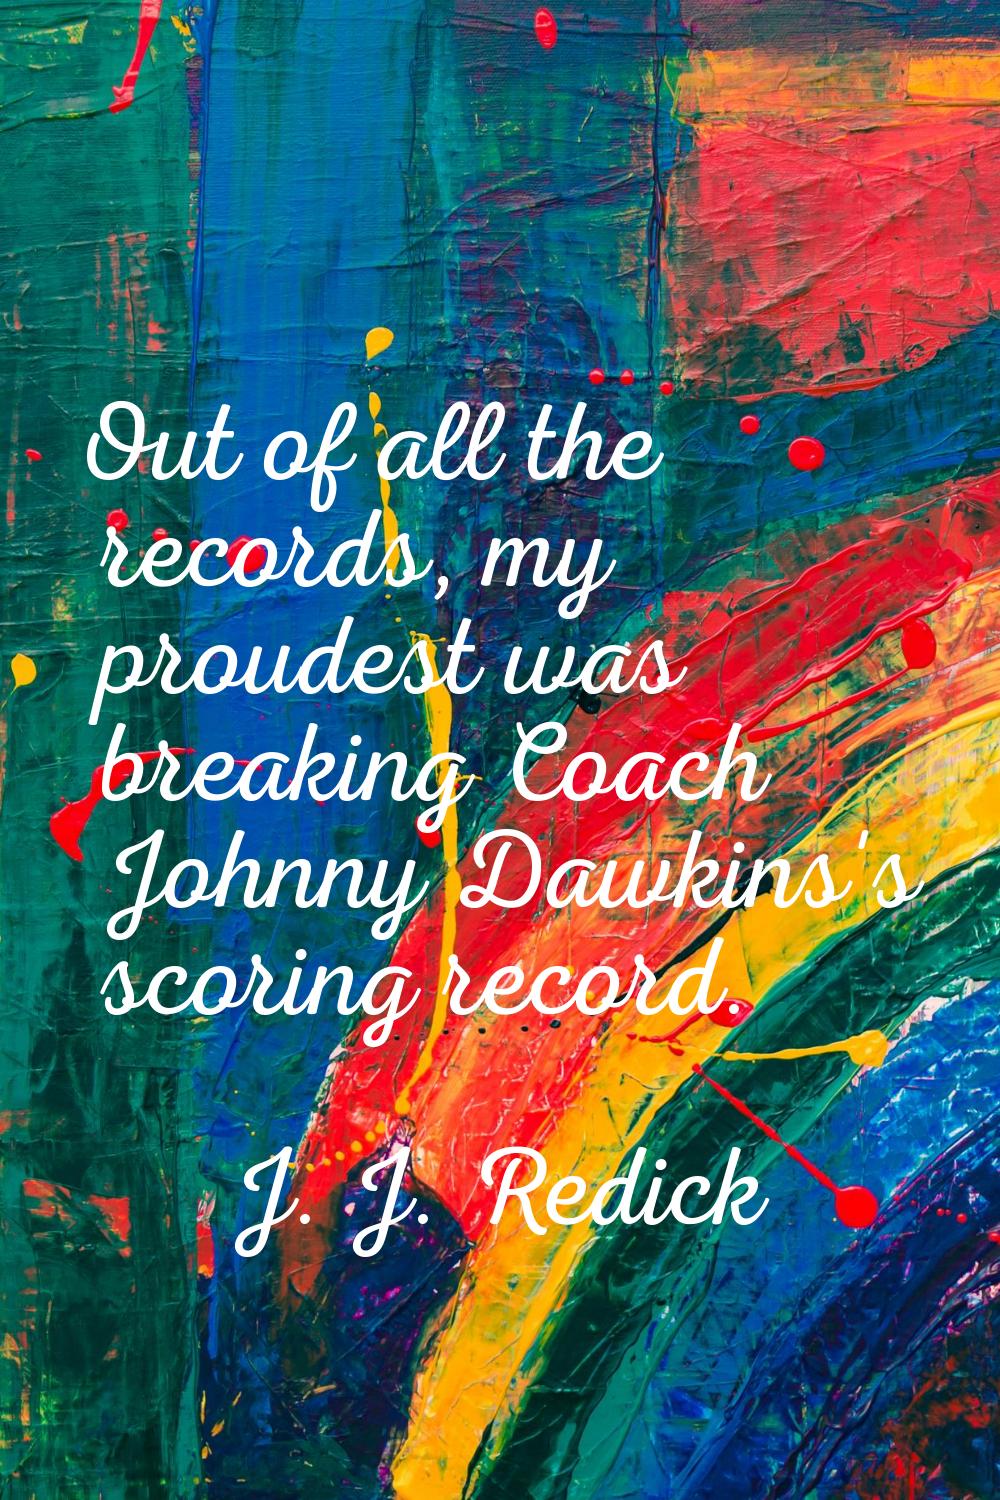 Out of all the records, my proudest was breaking Coach Johnny Dawkins's scoring record.